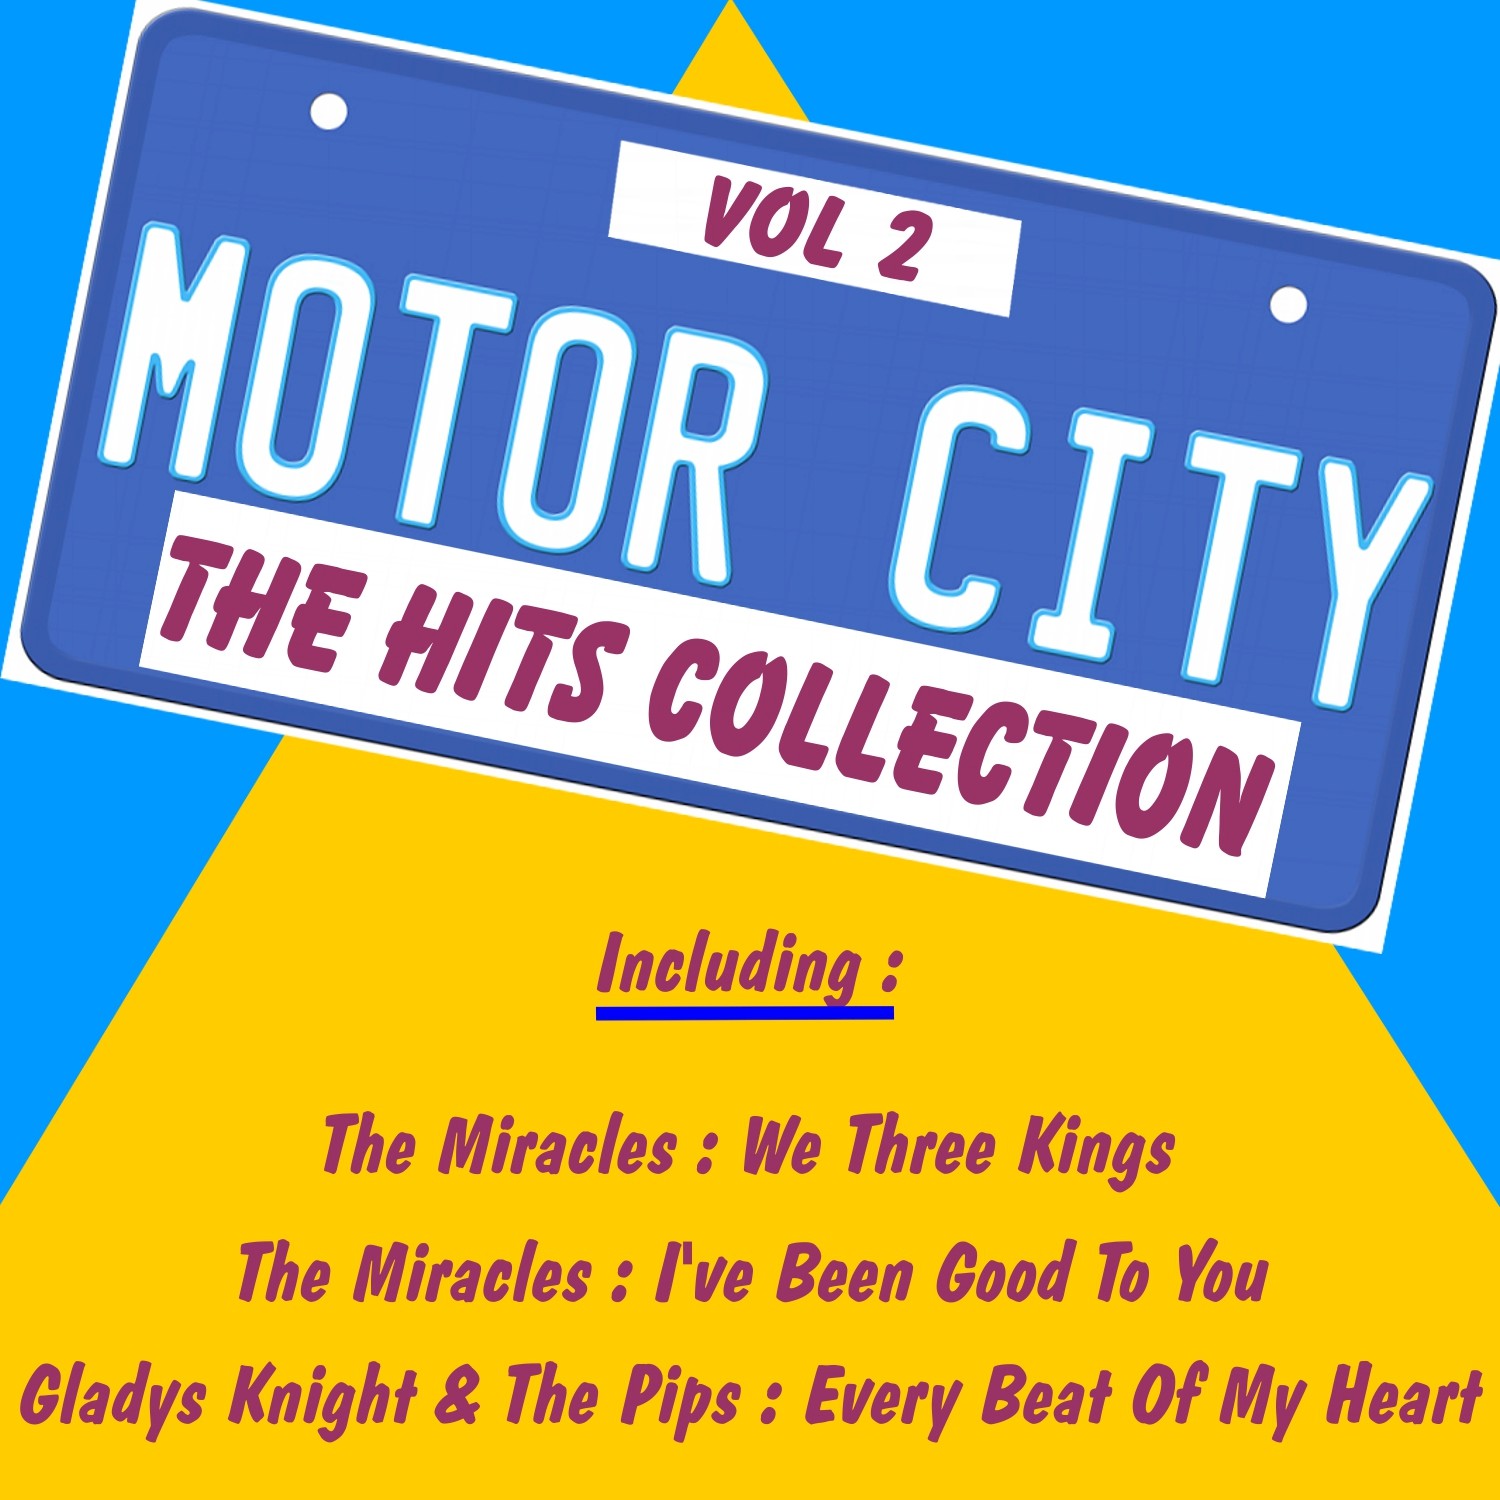 Motor City the Hits Collection, Vol. Two